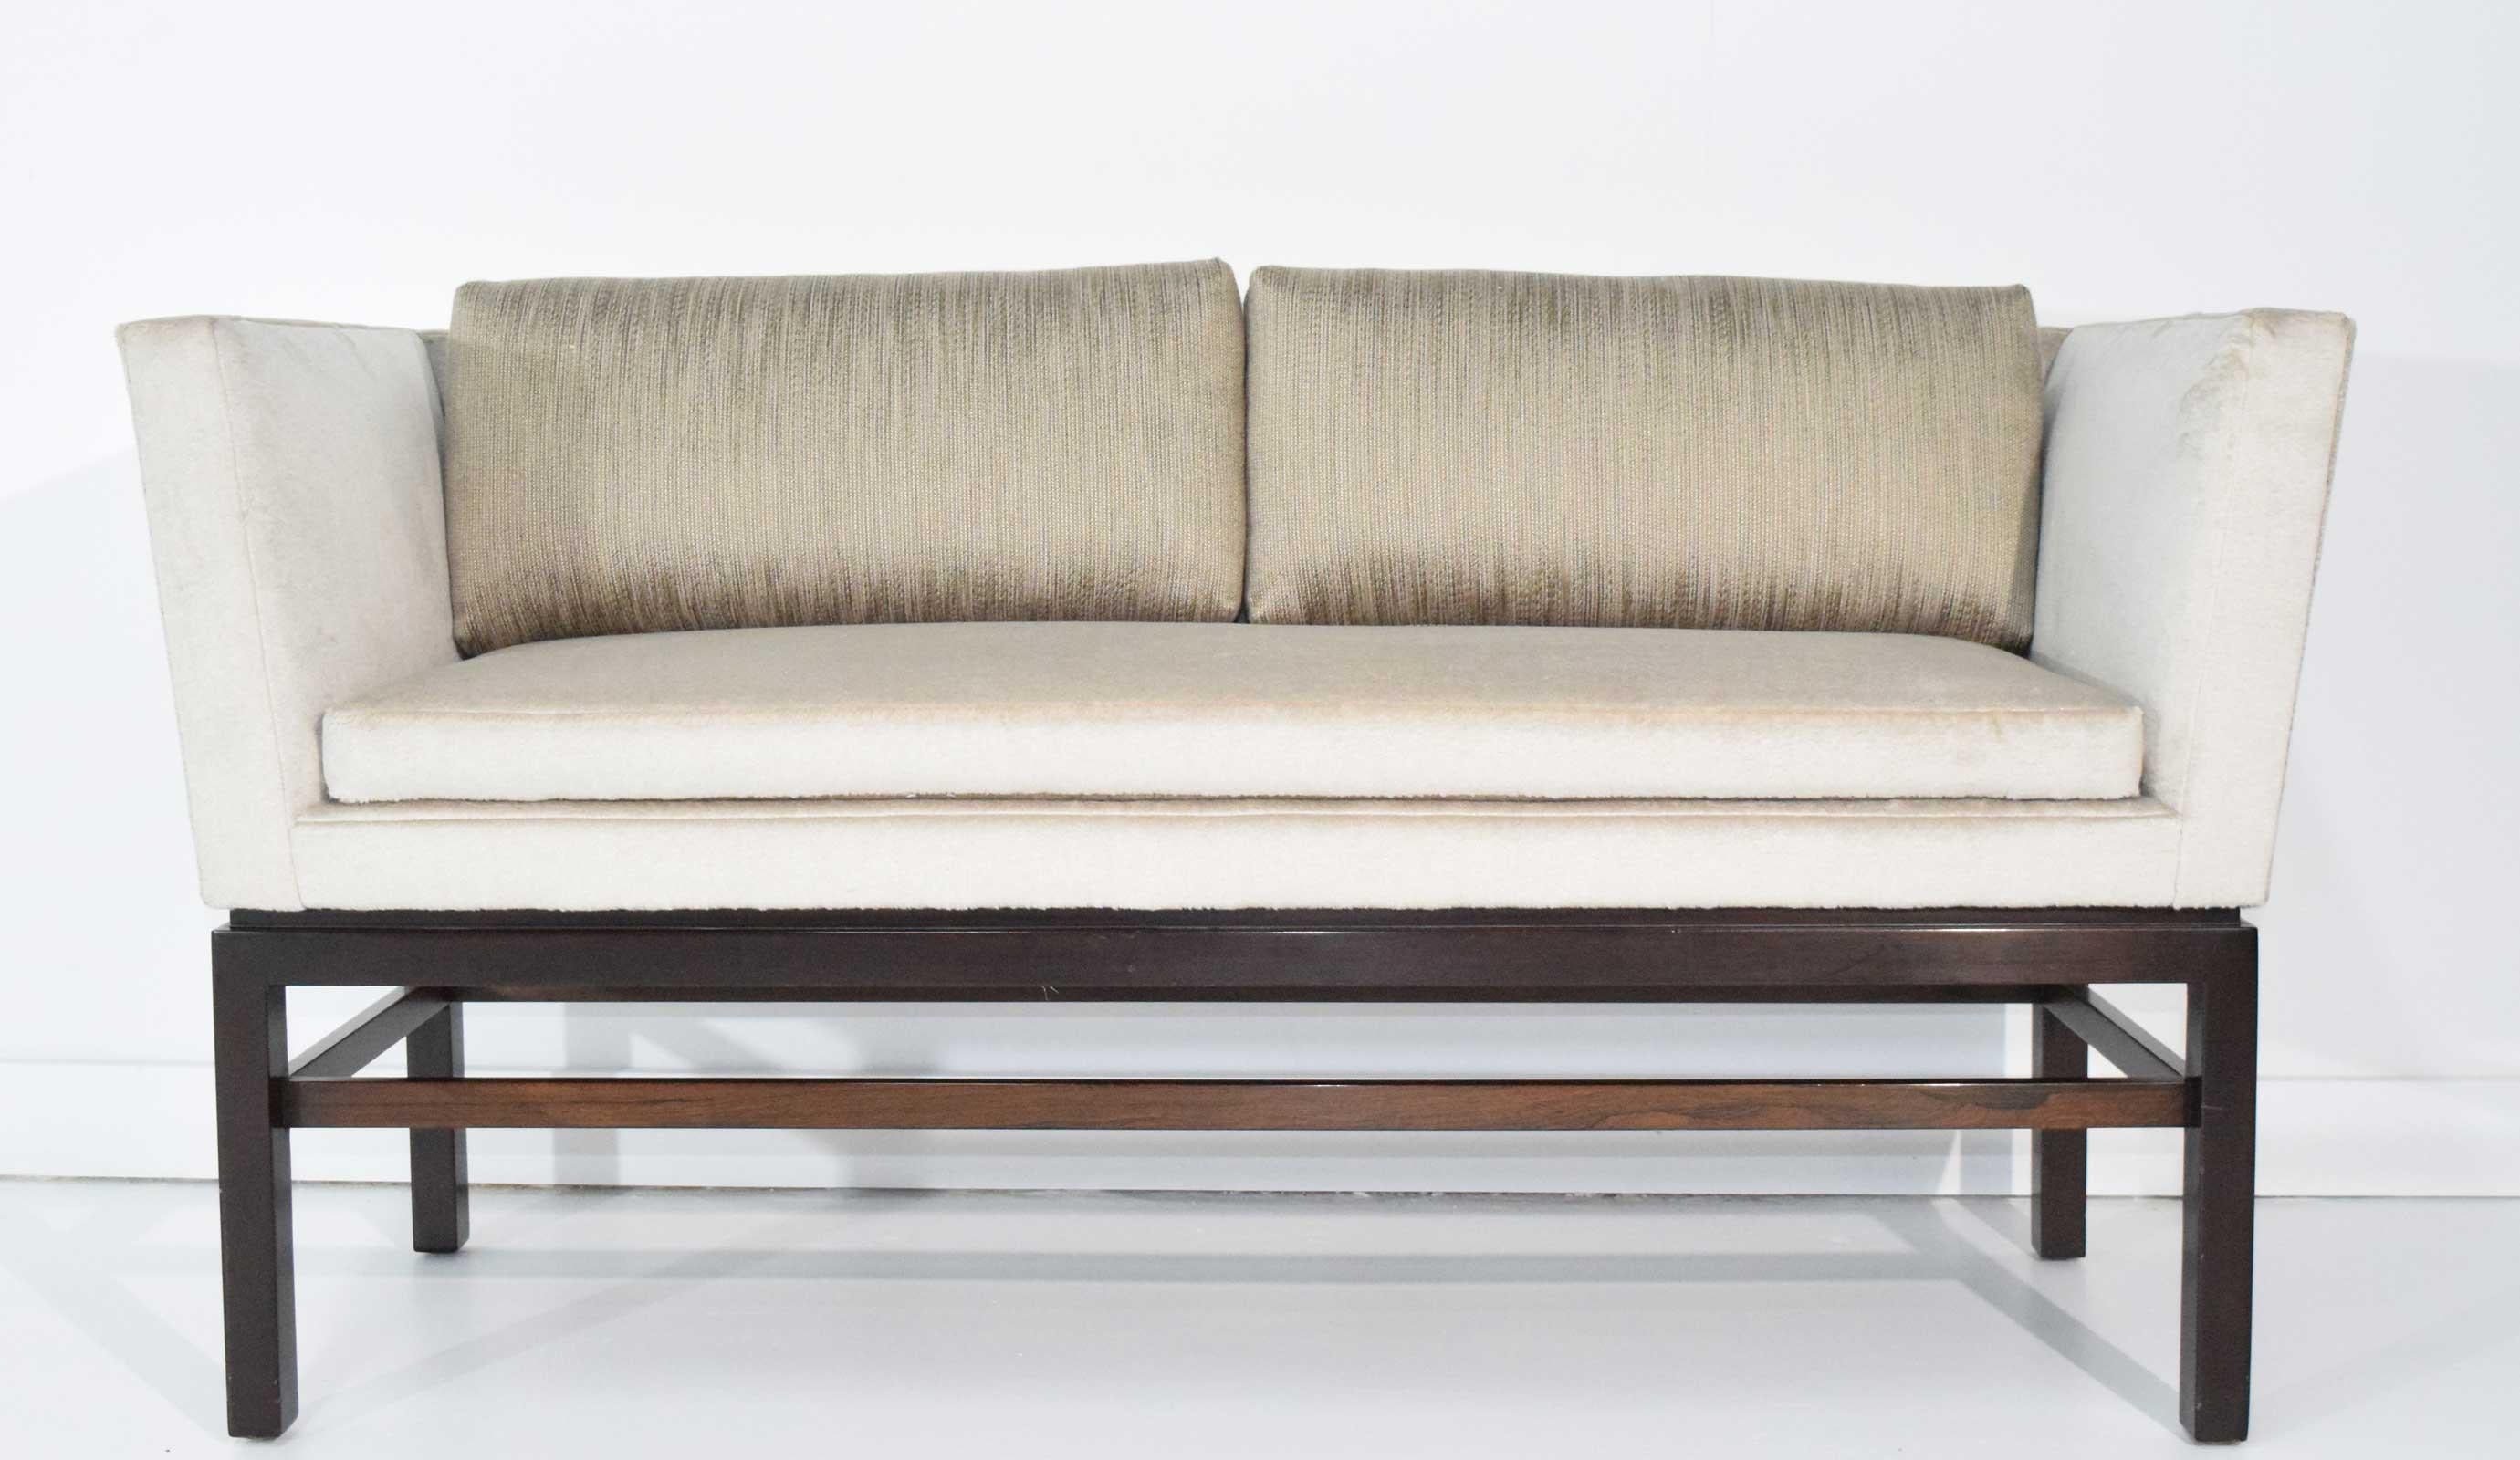 Settee has a Holly Hunt silk and camel hair fabric with a mahogany base.